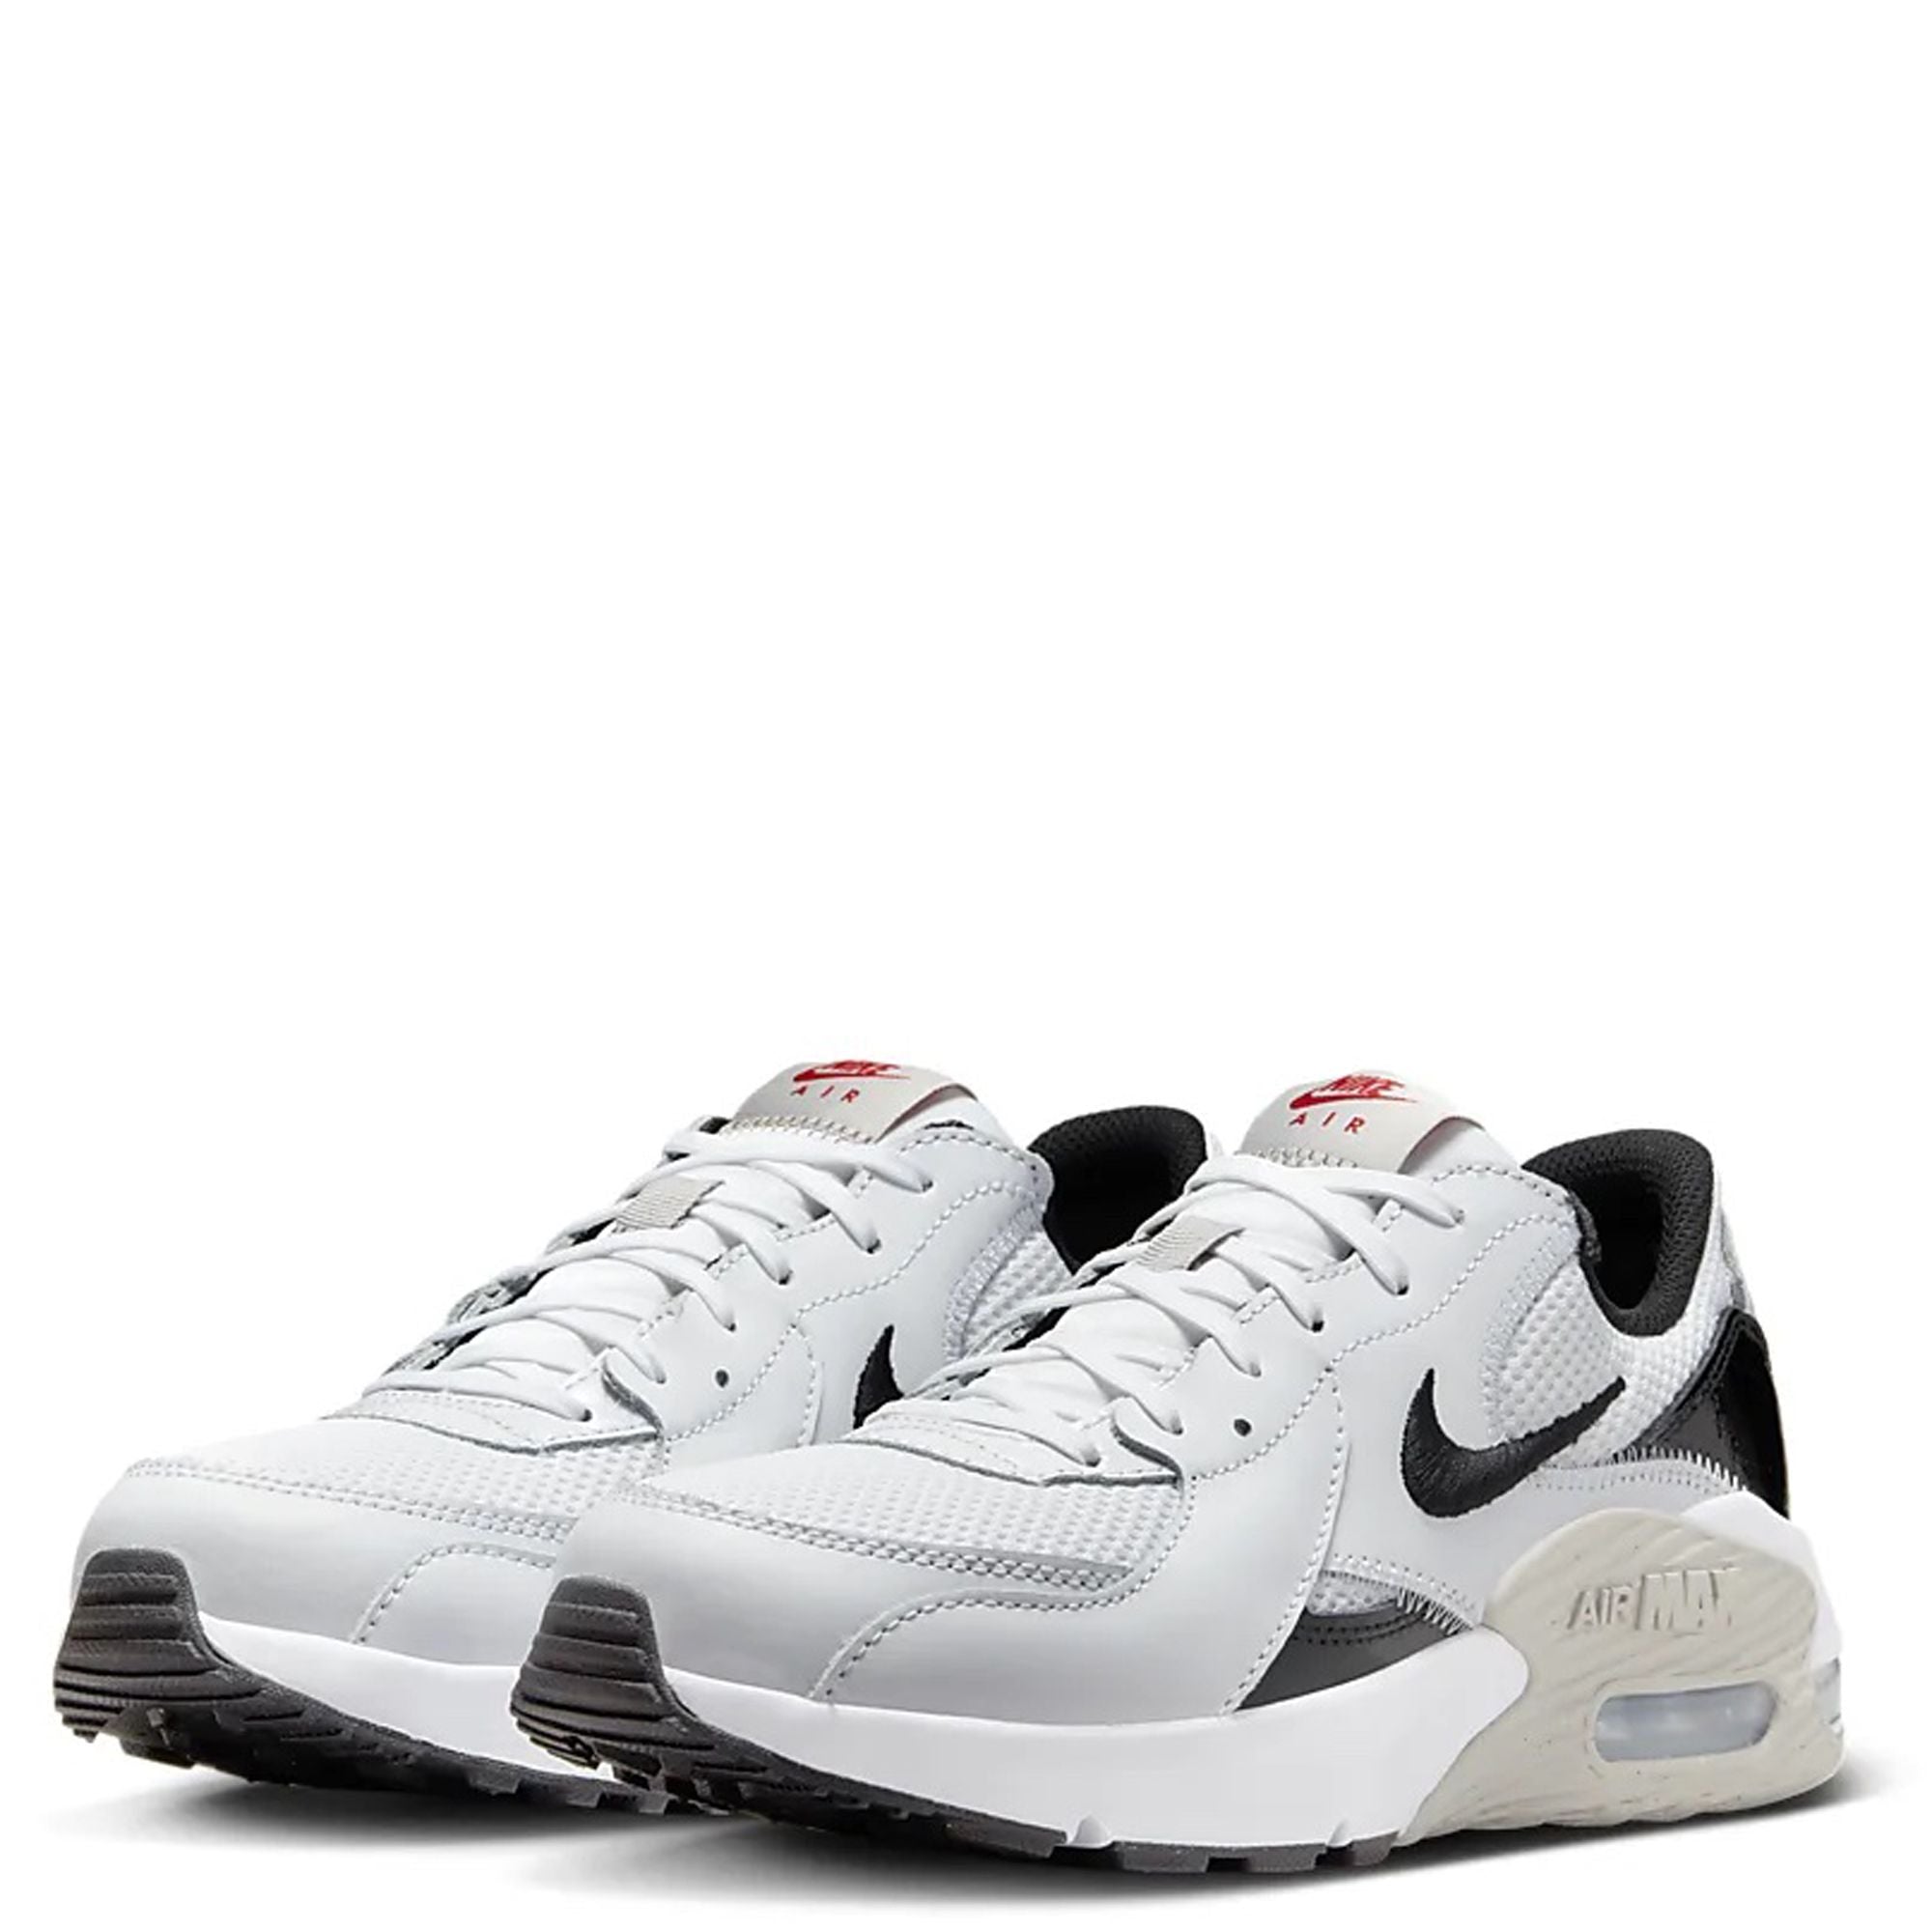 Nike Women's Air Max Excee Shoes White/Black-LT Iron Ore-University Red DR2402 100